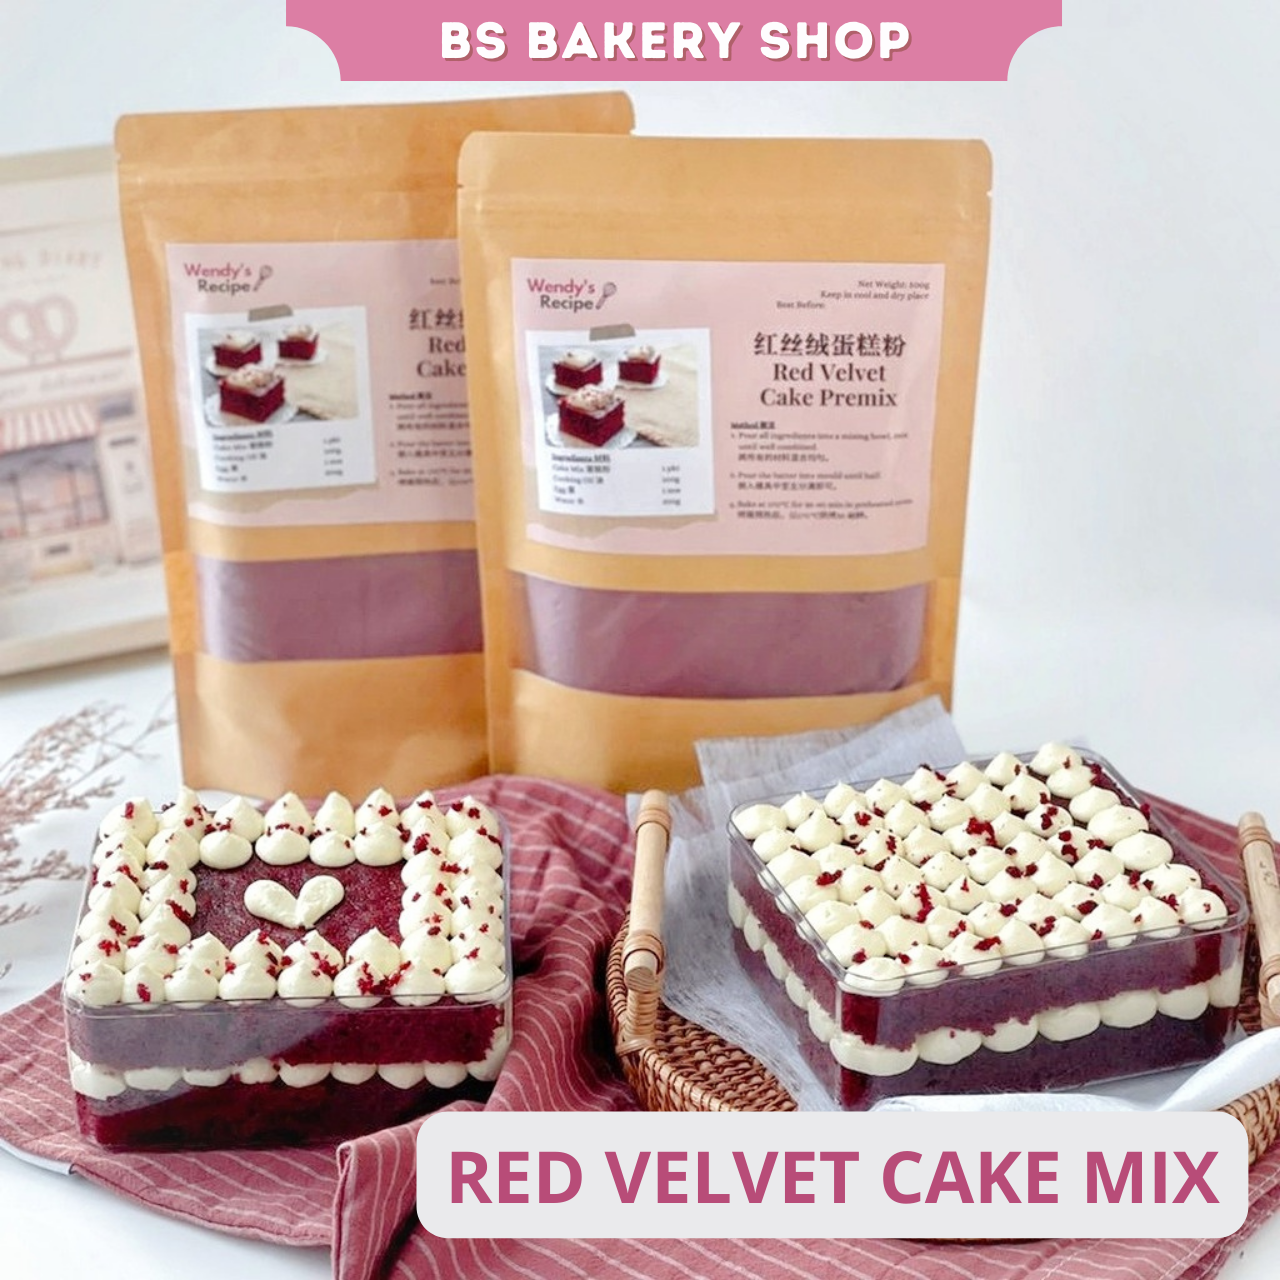 Bake your own chocolate sponge cake with LOCABA's pre-mix!